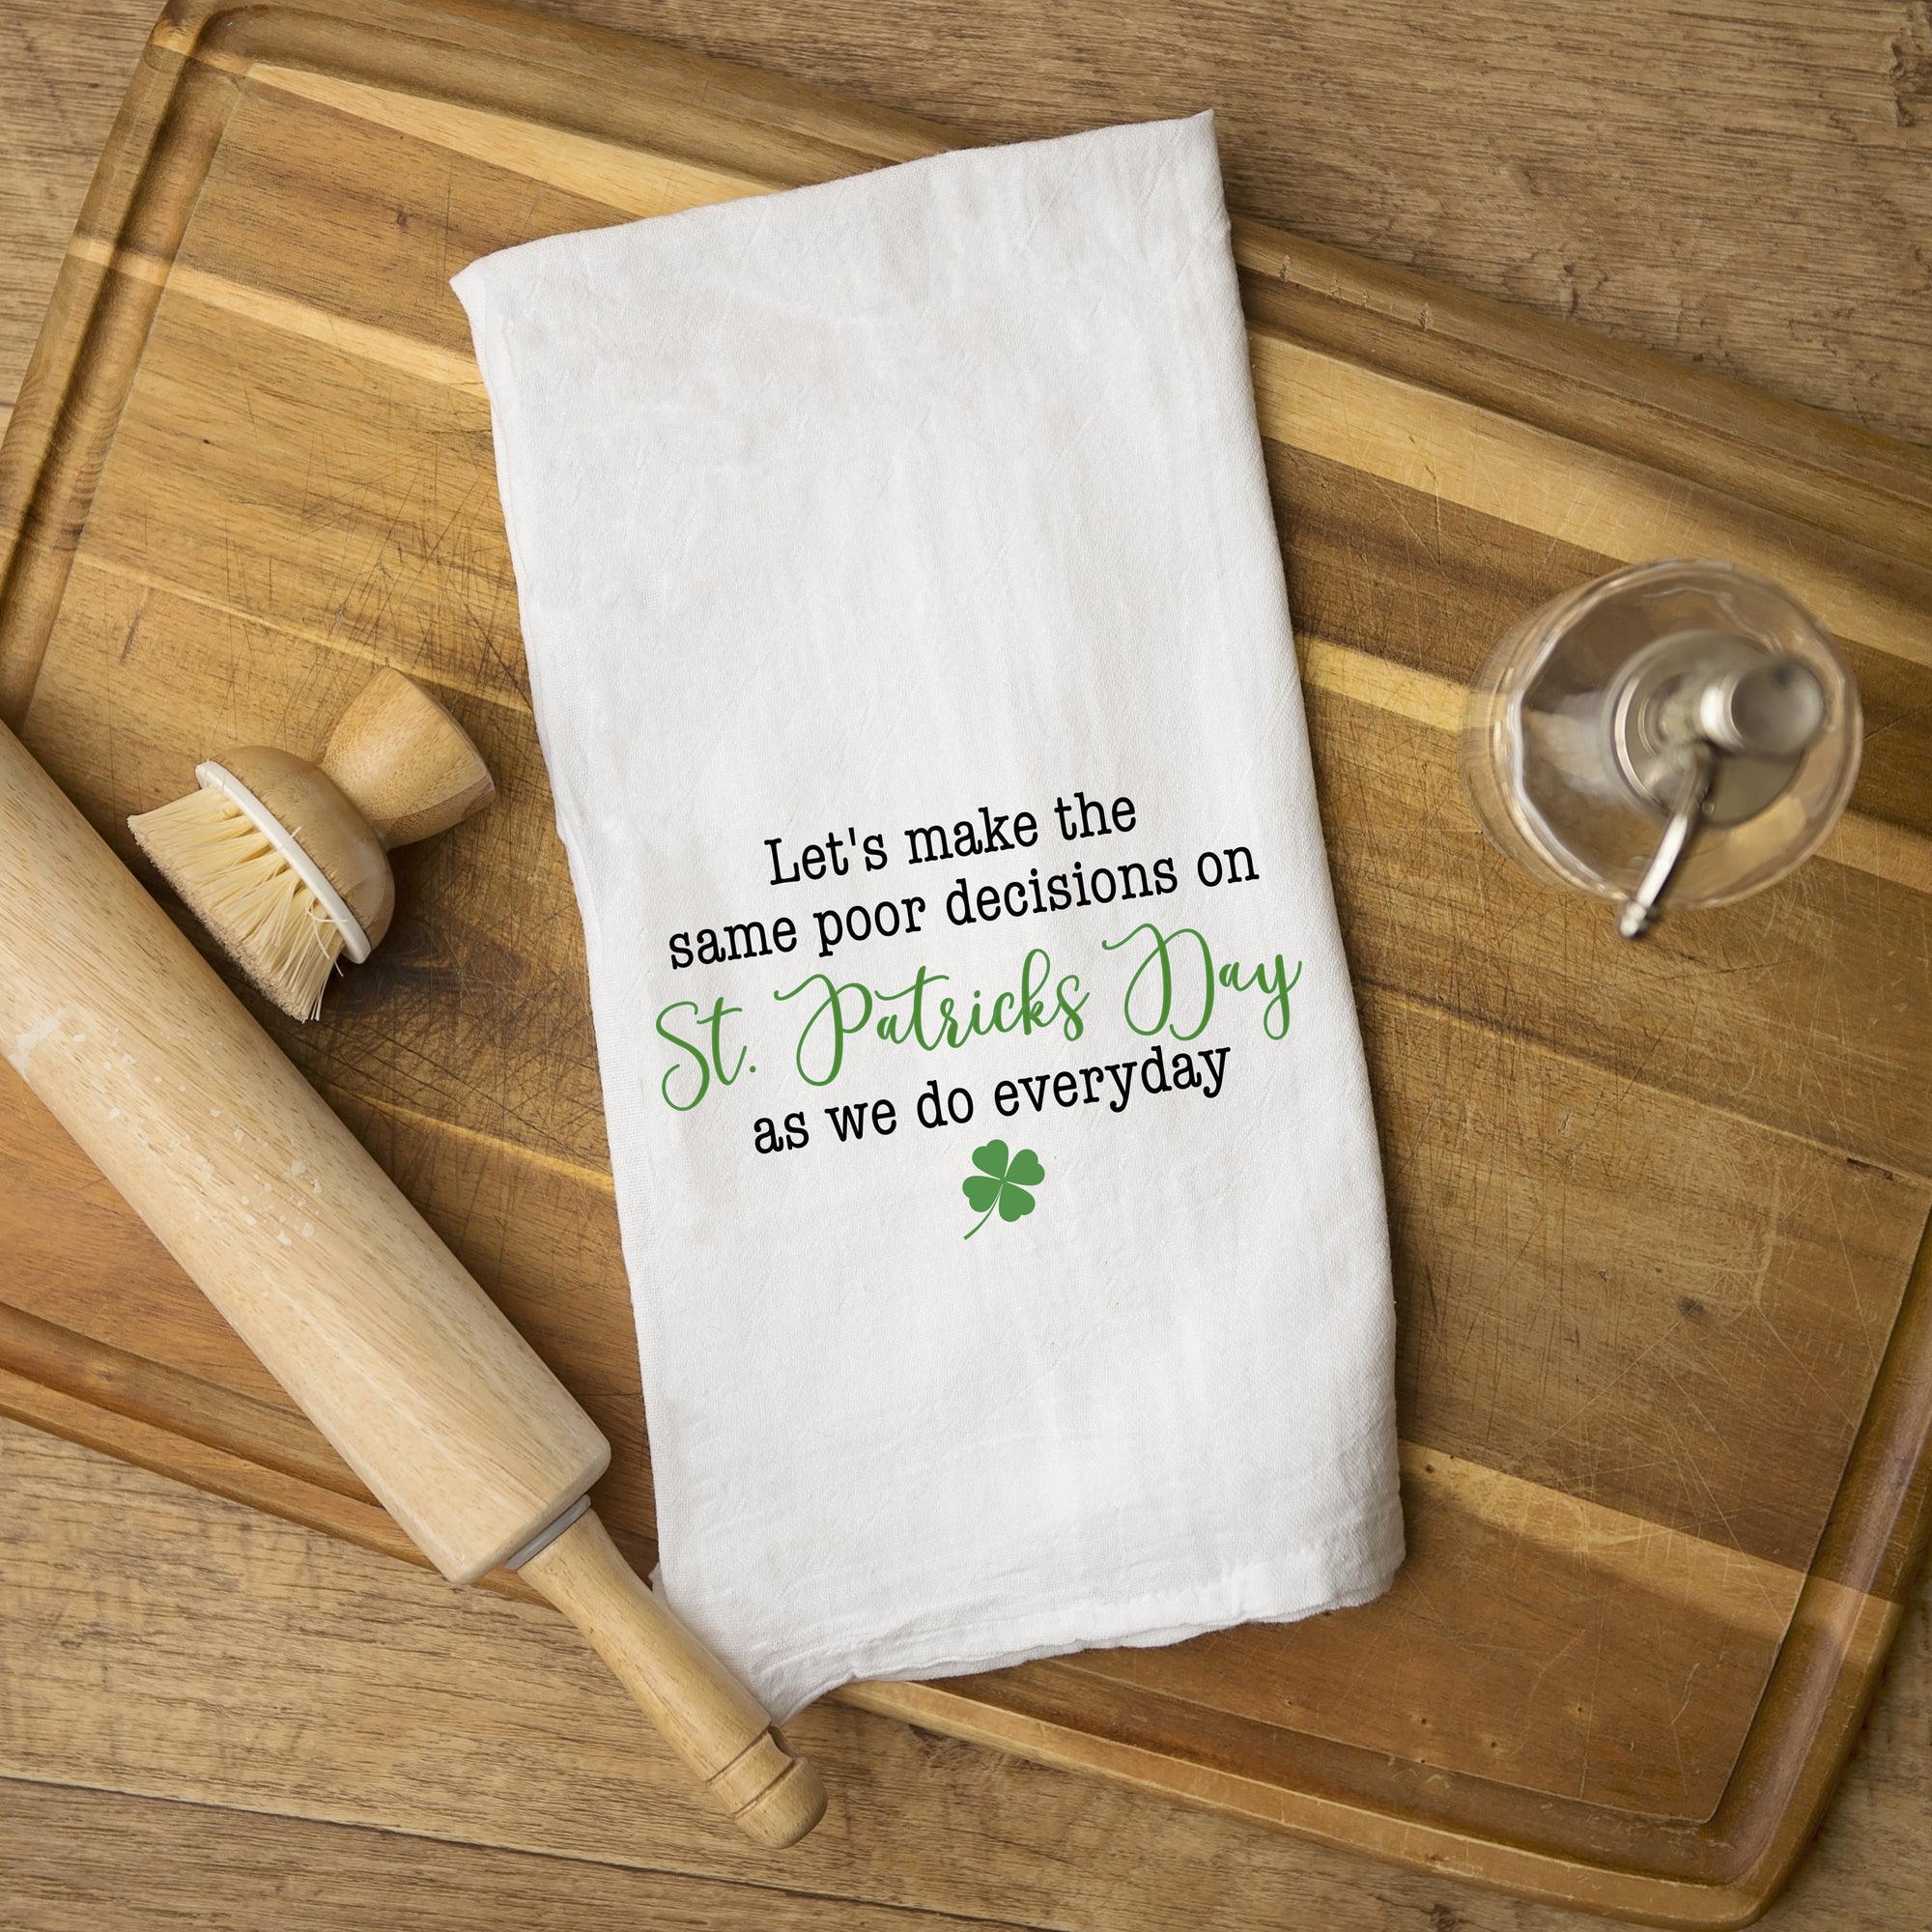 Let's make the same poor decision on St. Patrick's Day as we do everyday St. Patrick's Day Tea Towel, Funny Kitchen Towel, Irish, PIPSY.COM